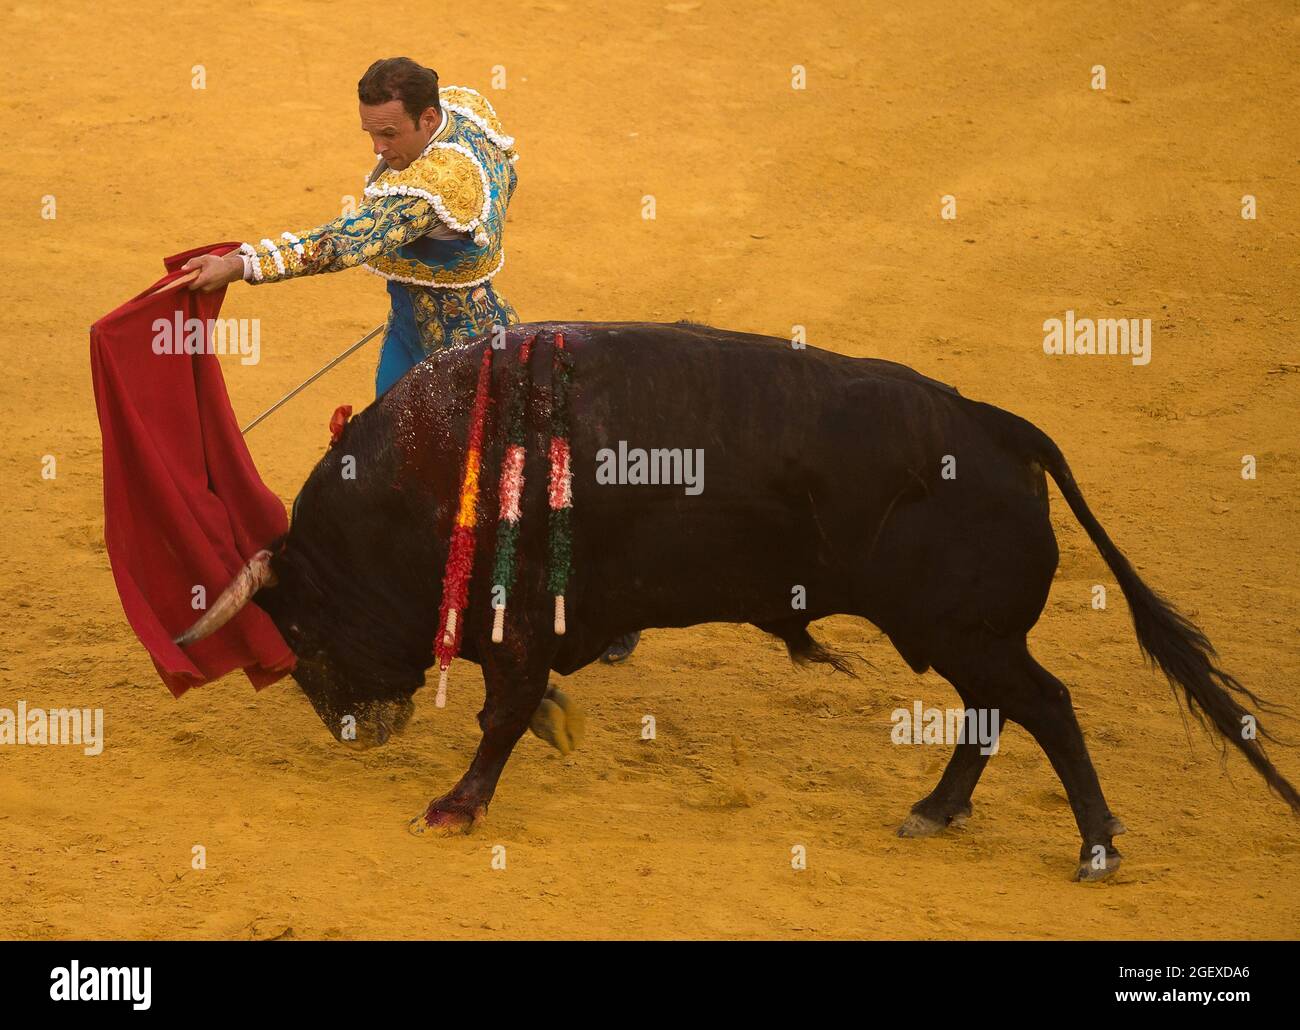 Malaga, Spain. 22nd Aug, 2021. Spanish bullfighter Jose Antonio Ferrera  performs a pass to a bull during a bullfight at La Malagueta   is a controversial tradition in Spain criticized by organizations